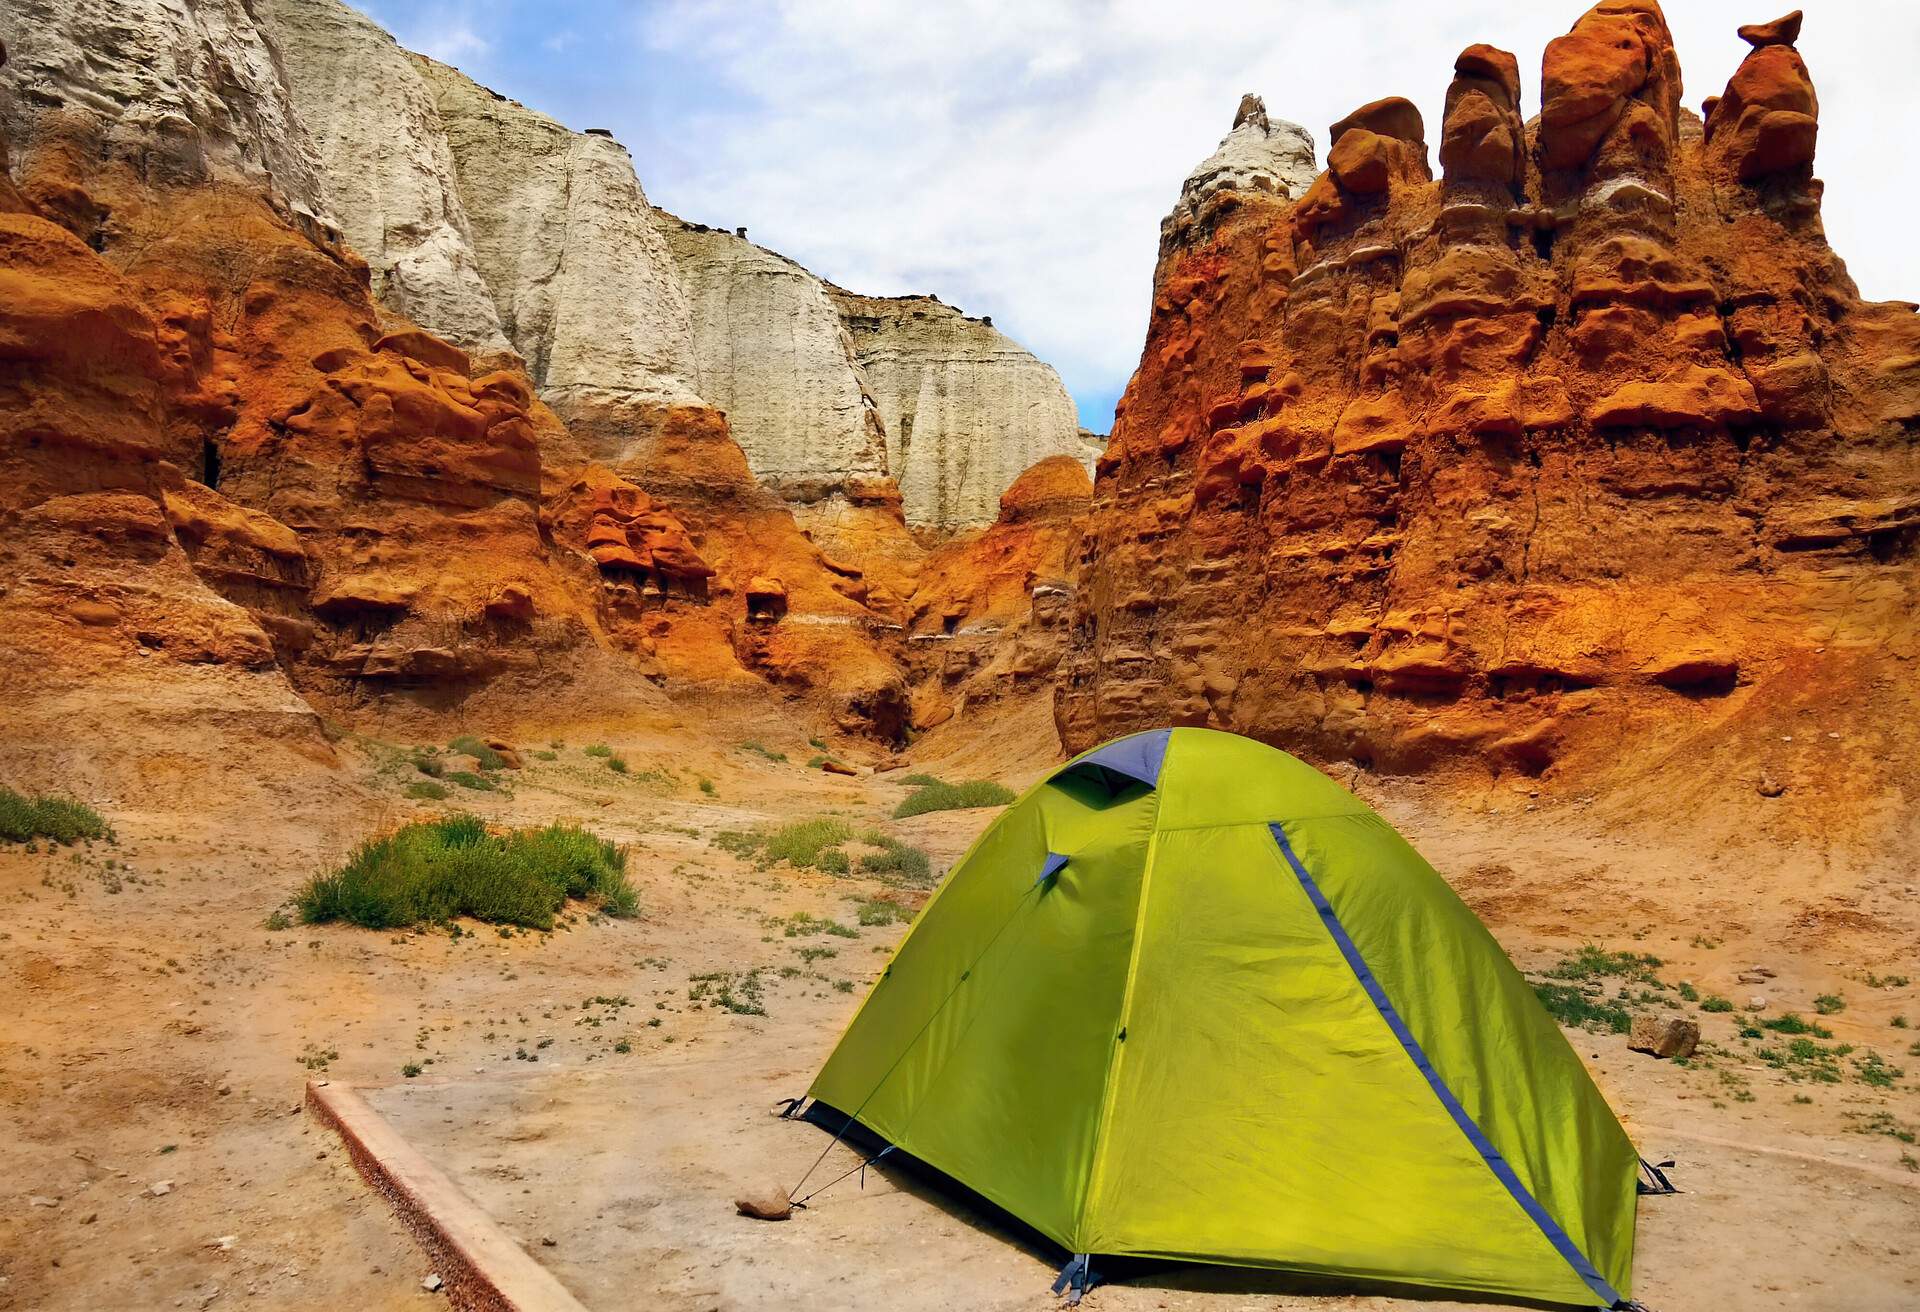 Green tent located at the base of a colourful valley with eroded and unique sandstone rock formations.